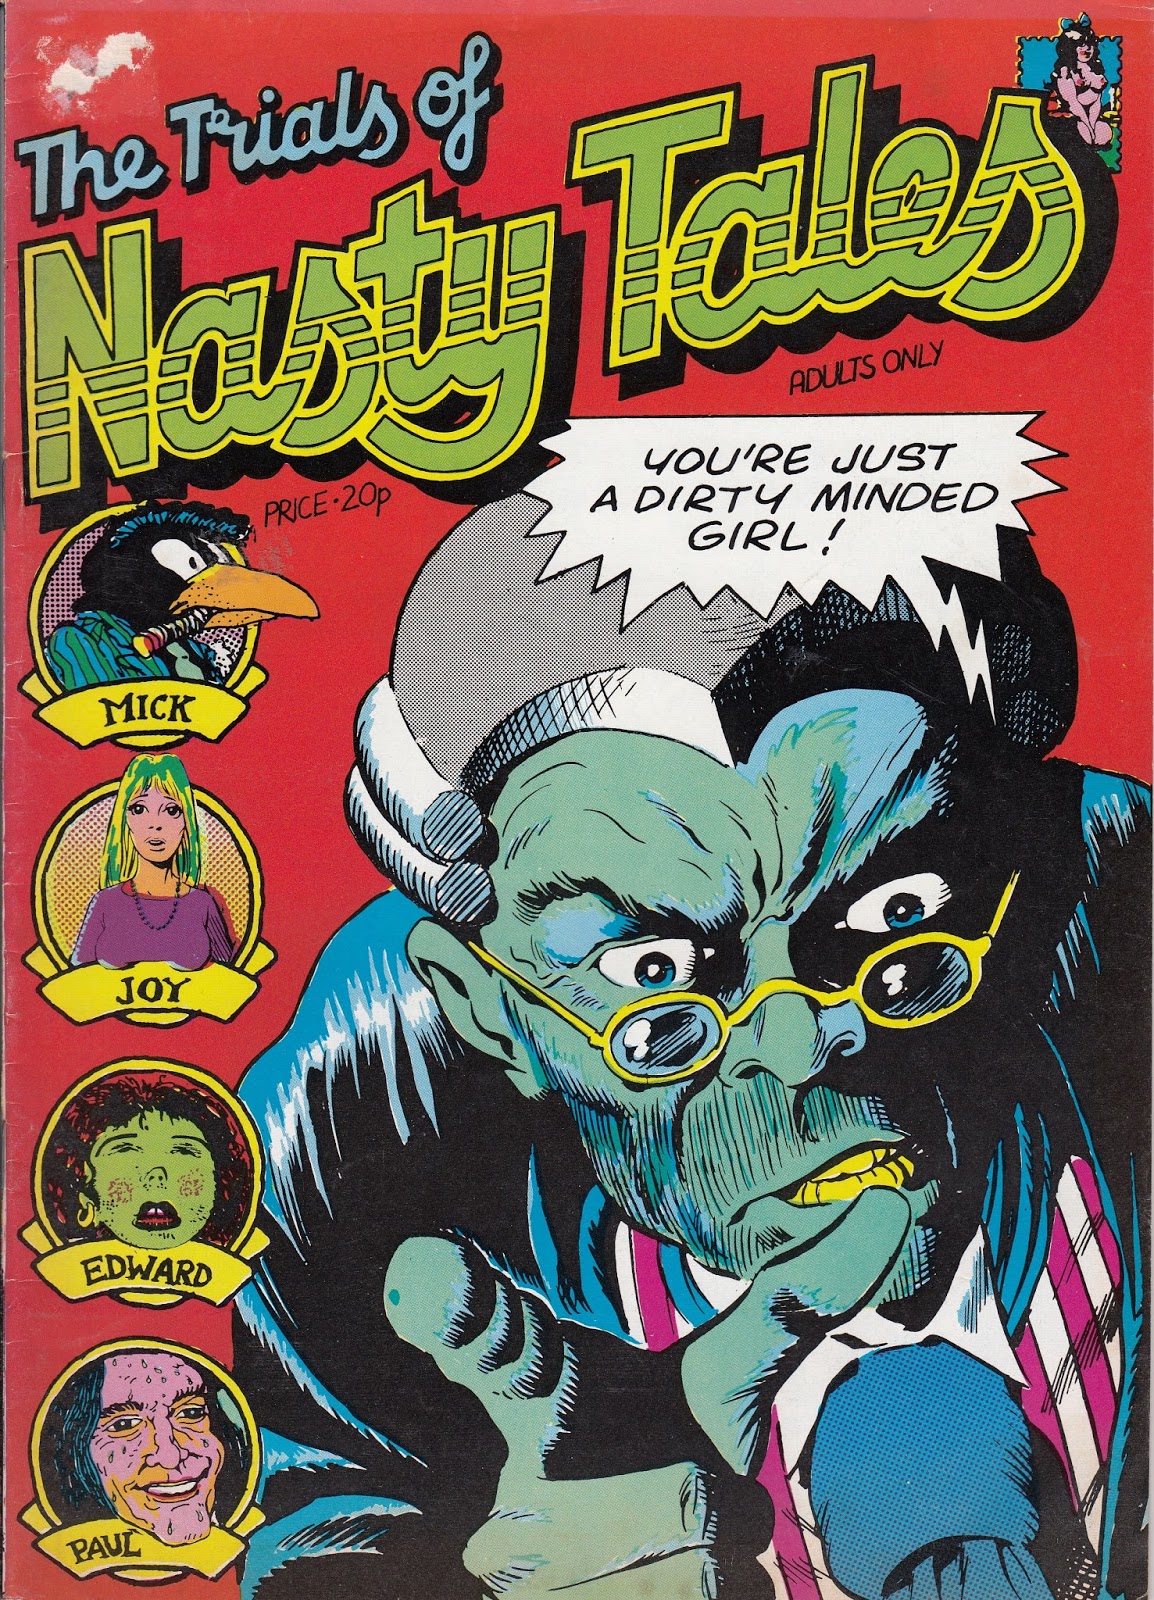 The Trials of Nasty Tales - 1973 Cover